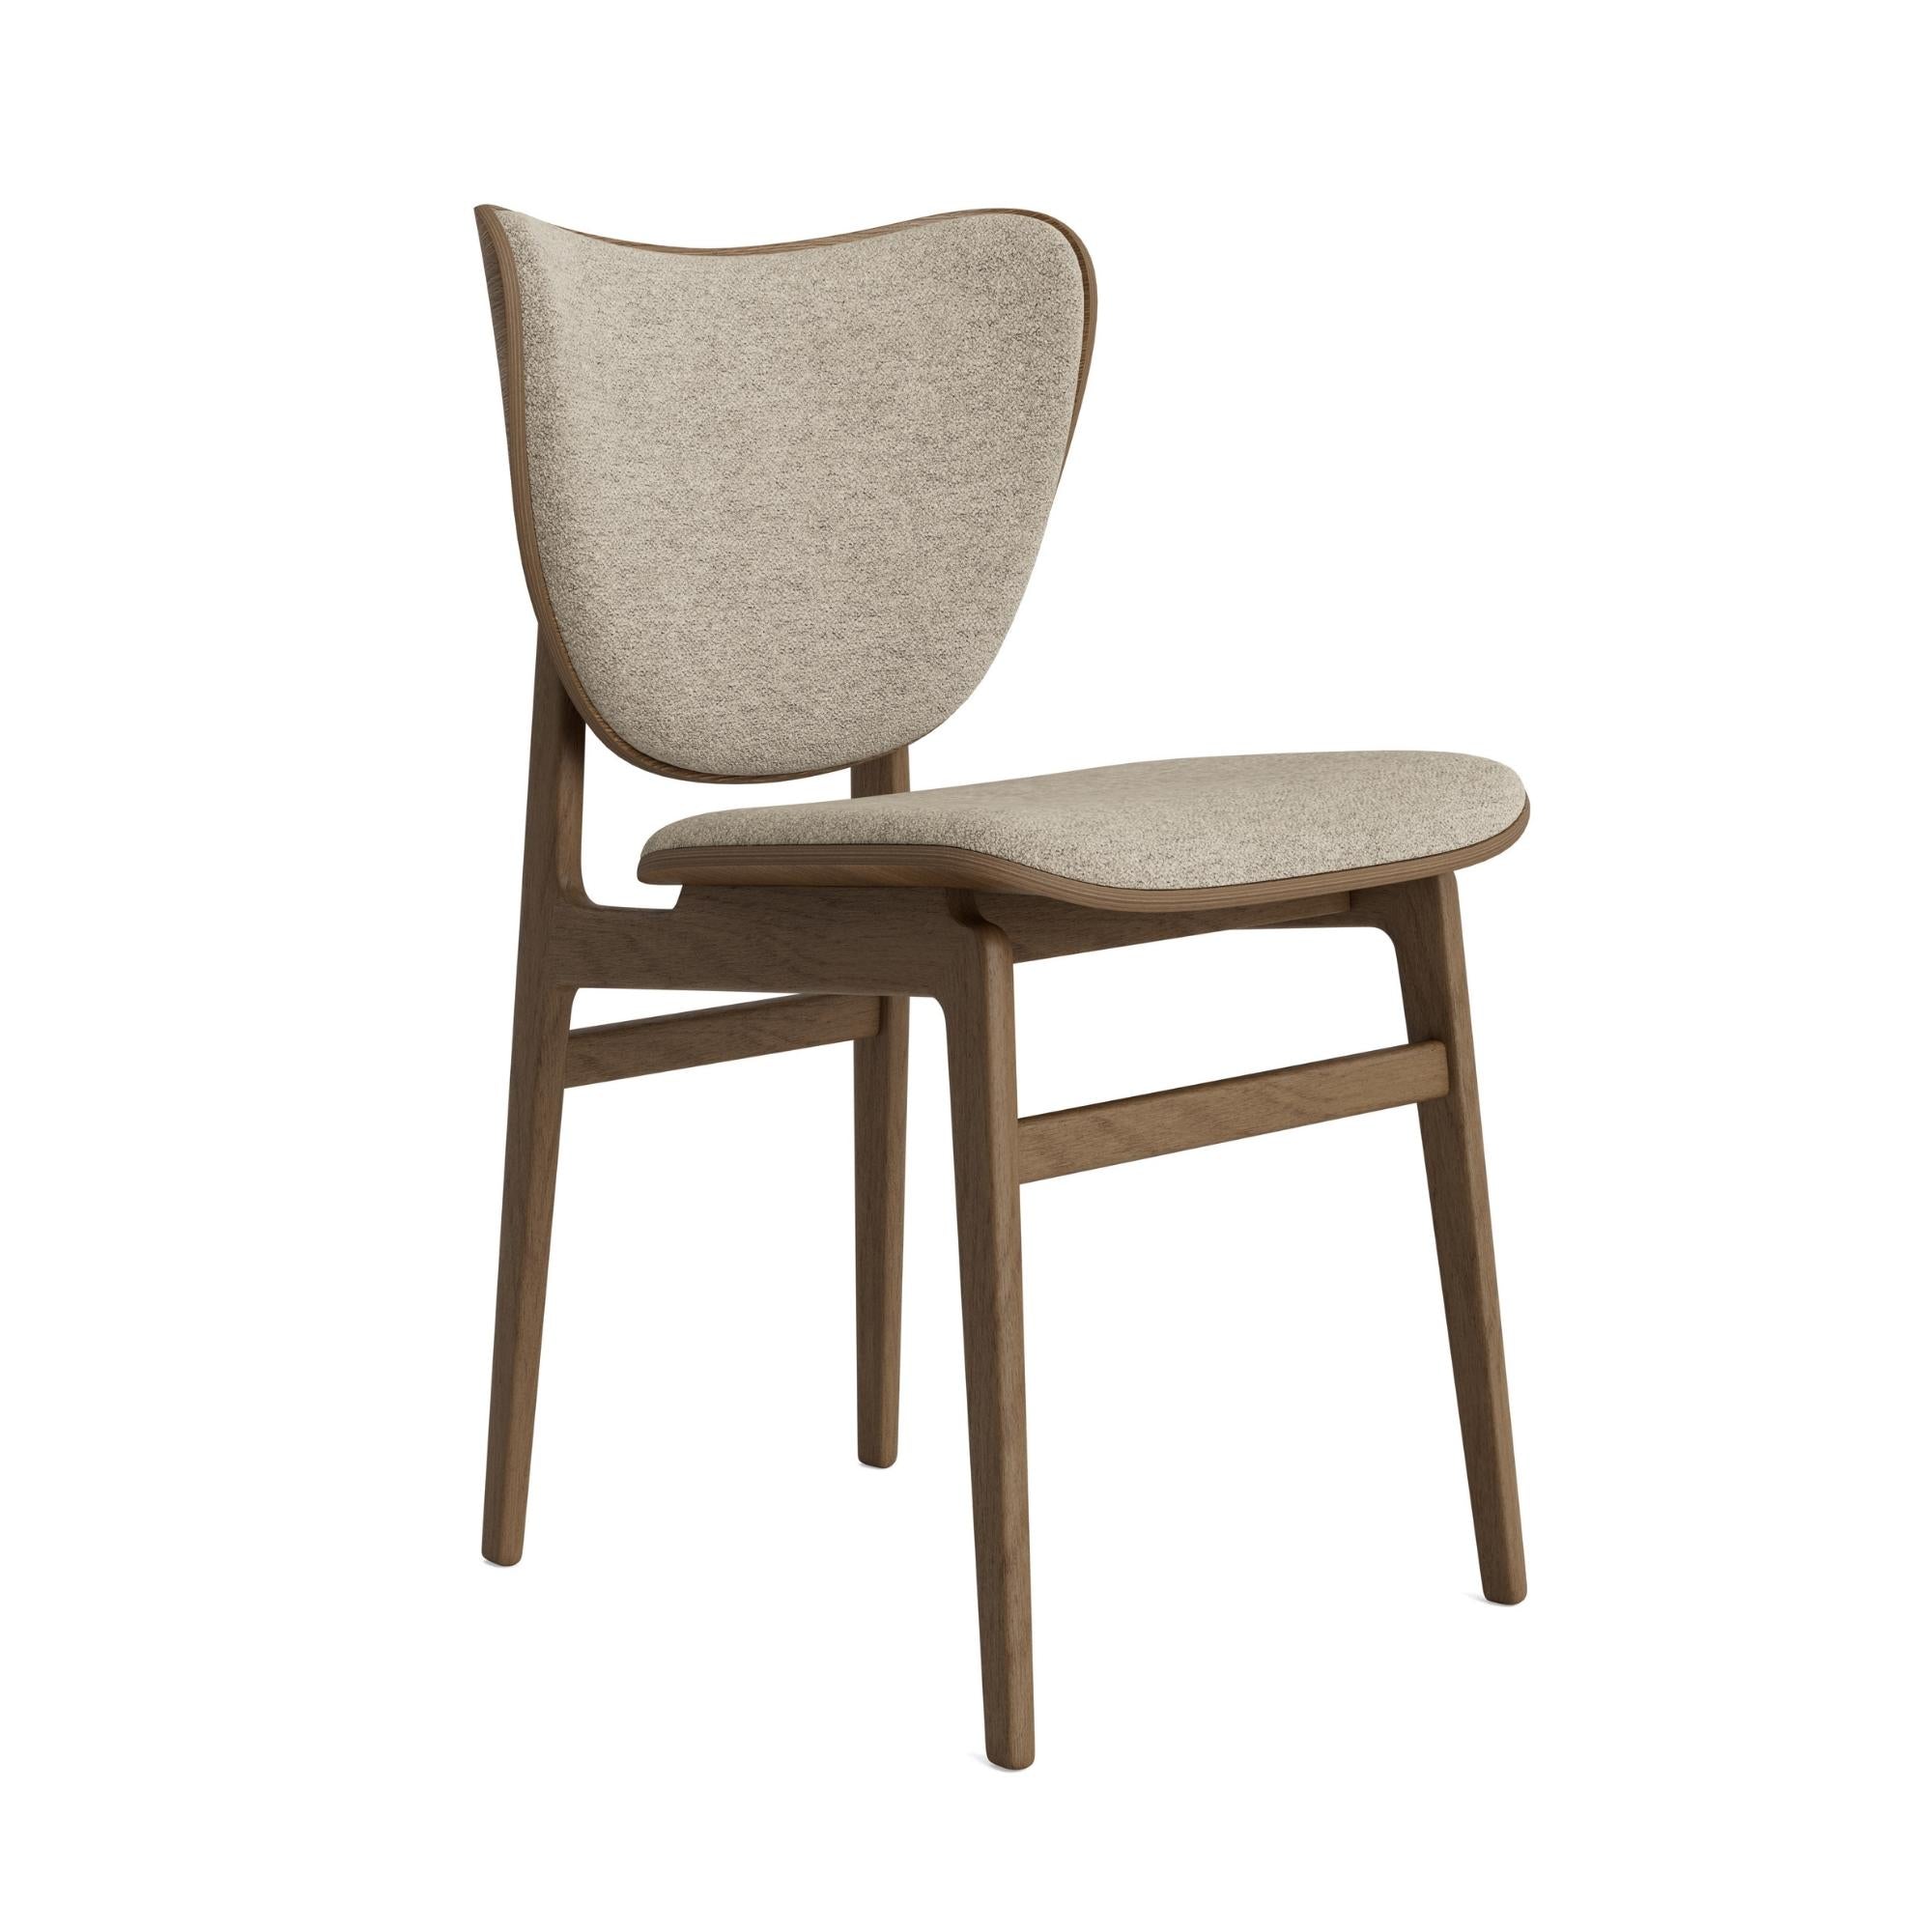 Elephant Chair - Boucle Chair NORR11